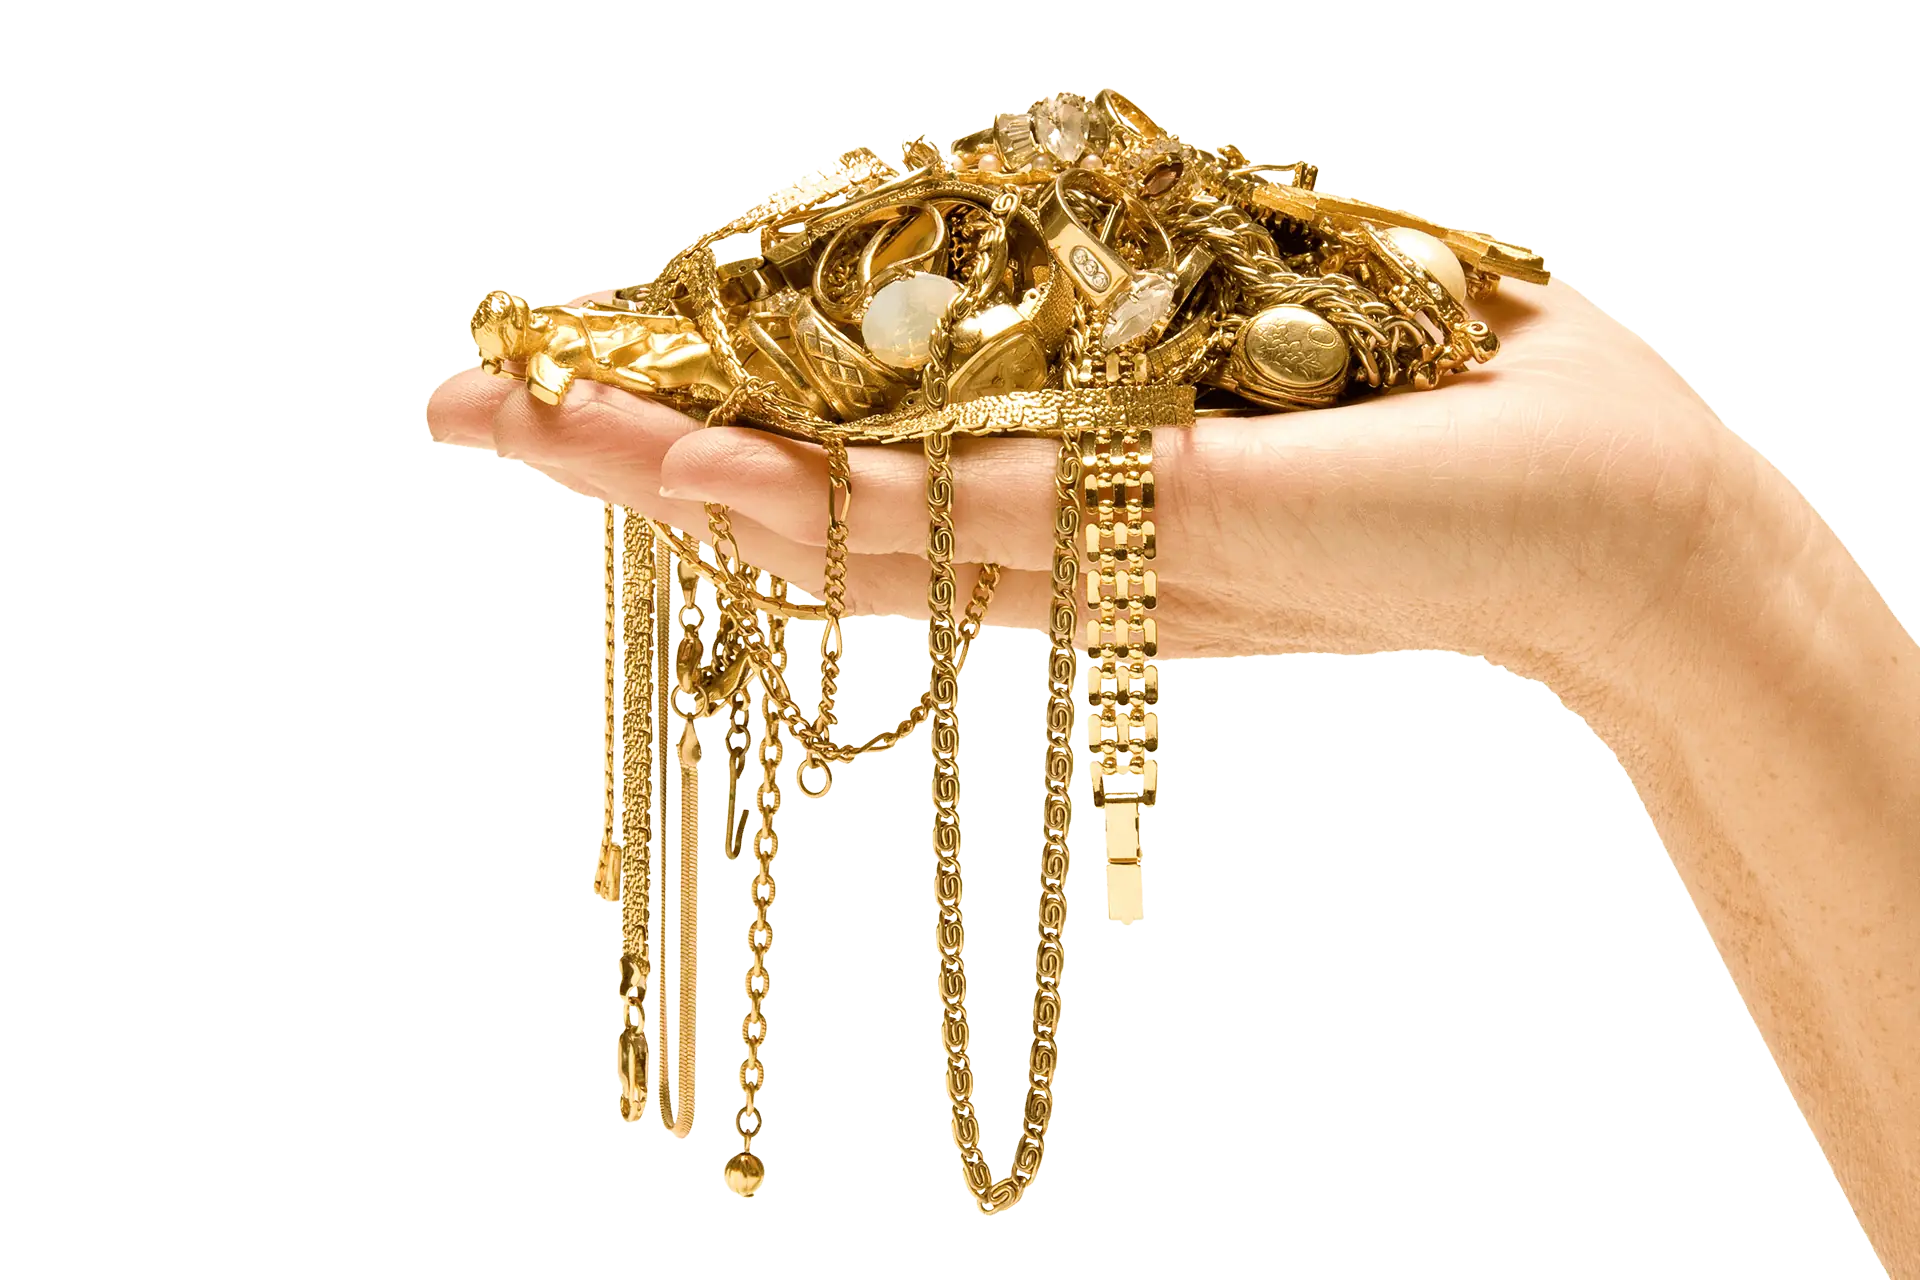 An open hand, palm up, holding a pile of gold bracelets, necklaces and rings on homepage of King Gold and Pawn in Brooklyn.